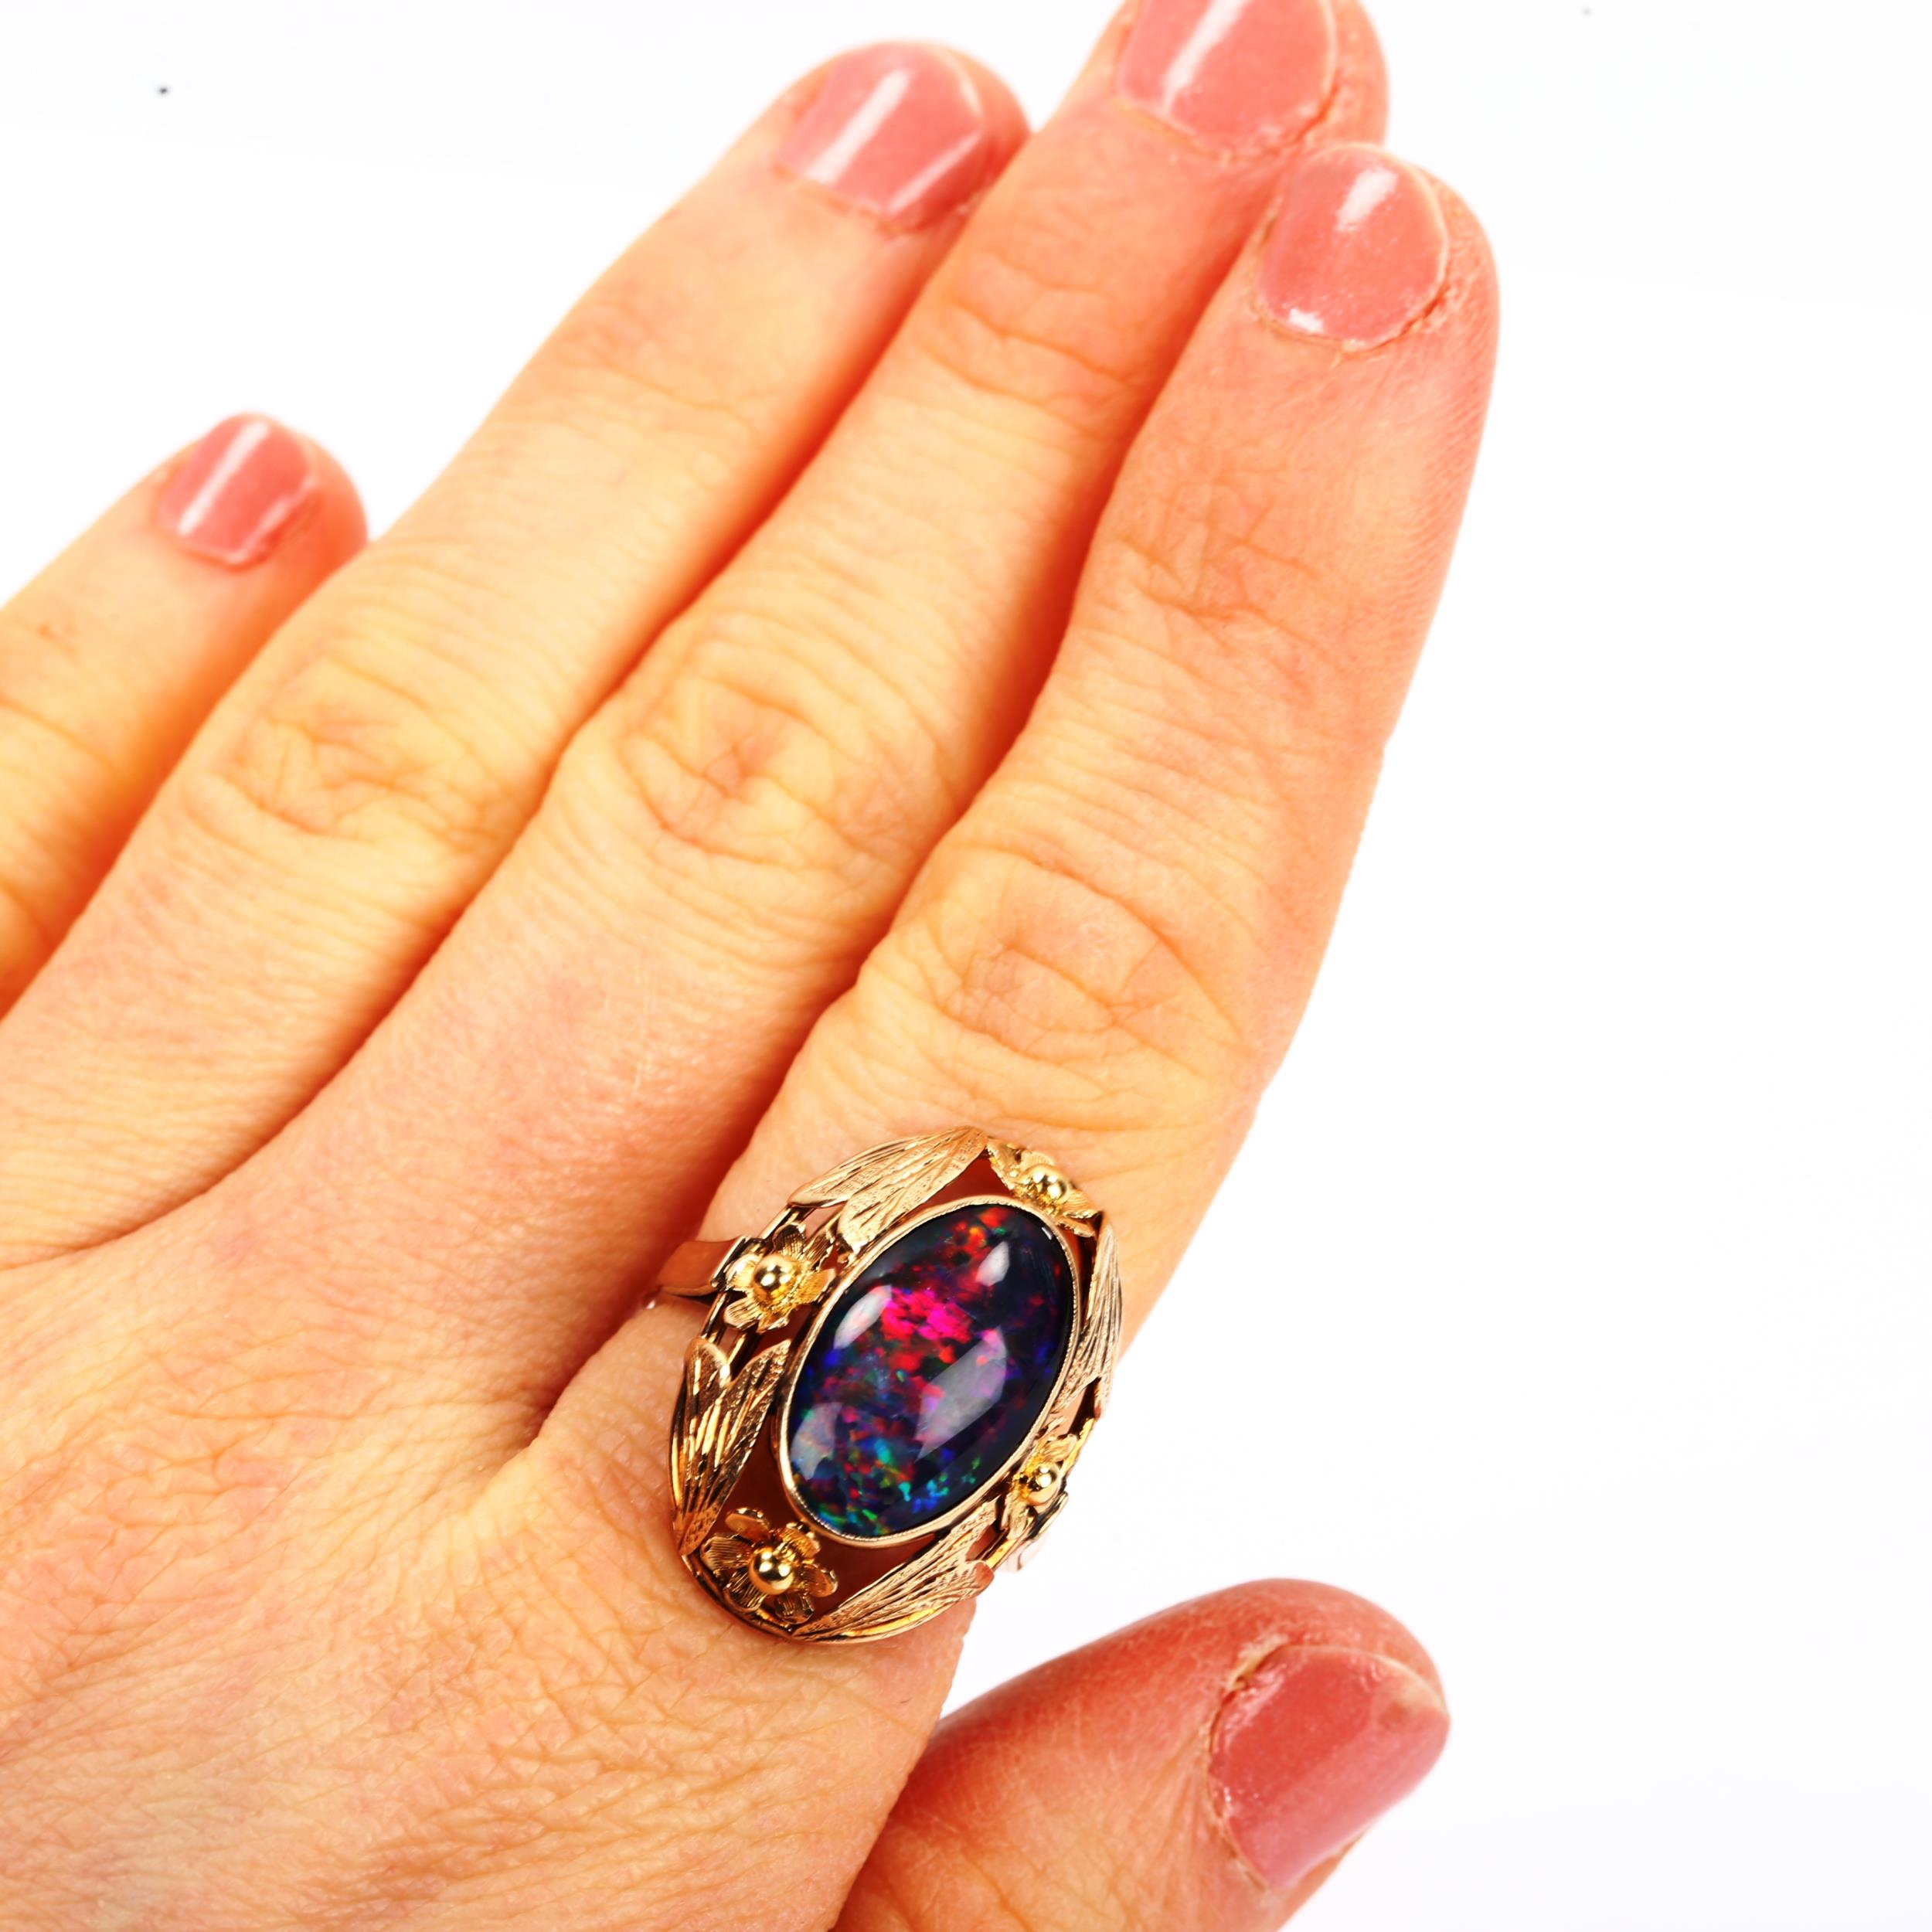 A large Continental black opal doublet dress ring, unmarked gold settings with floral bezel, setting - Image 4 of 4